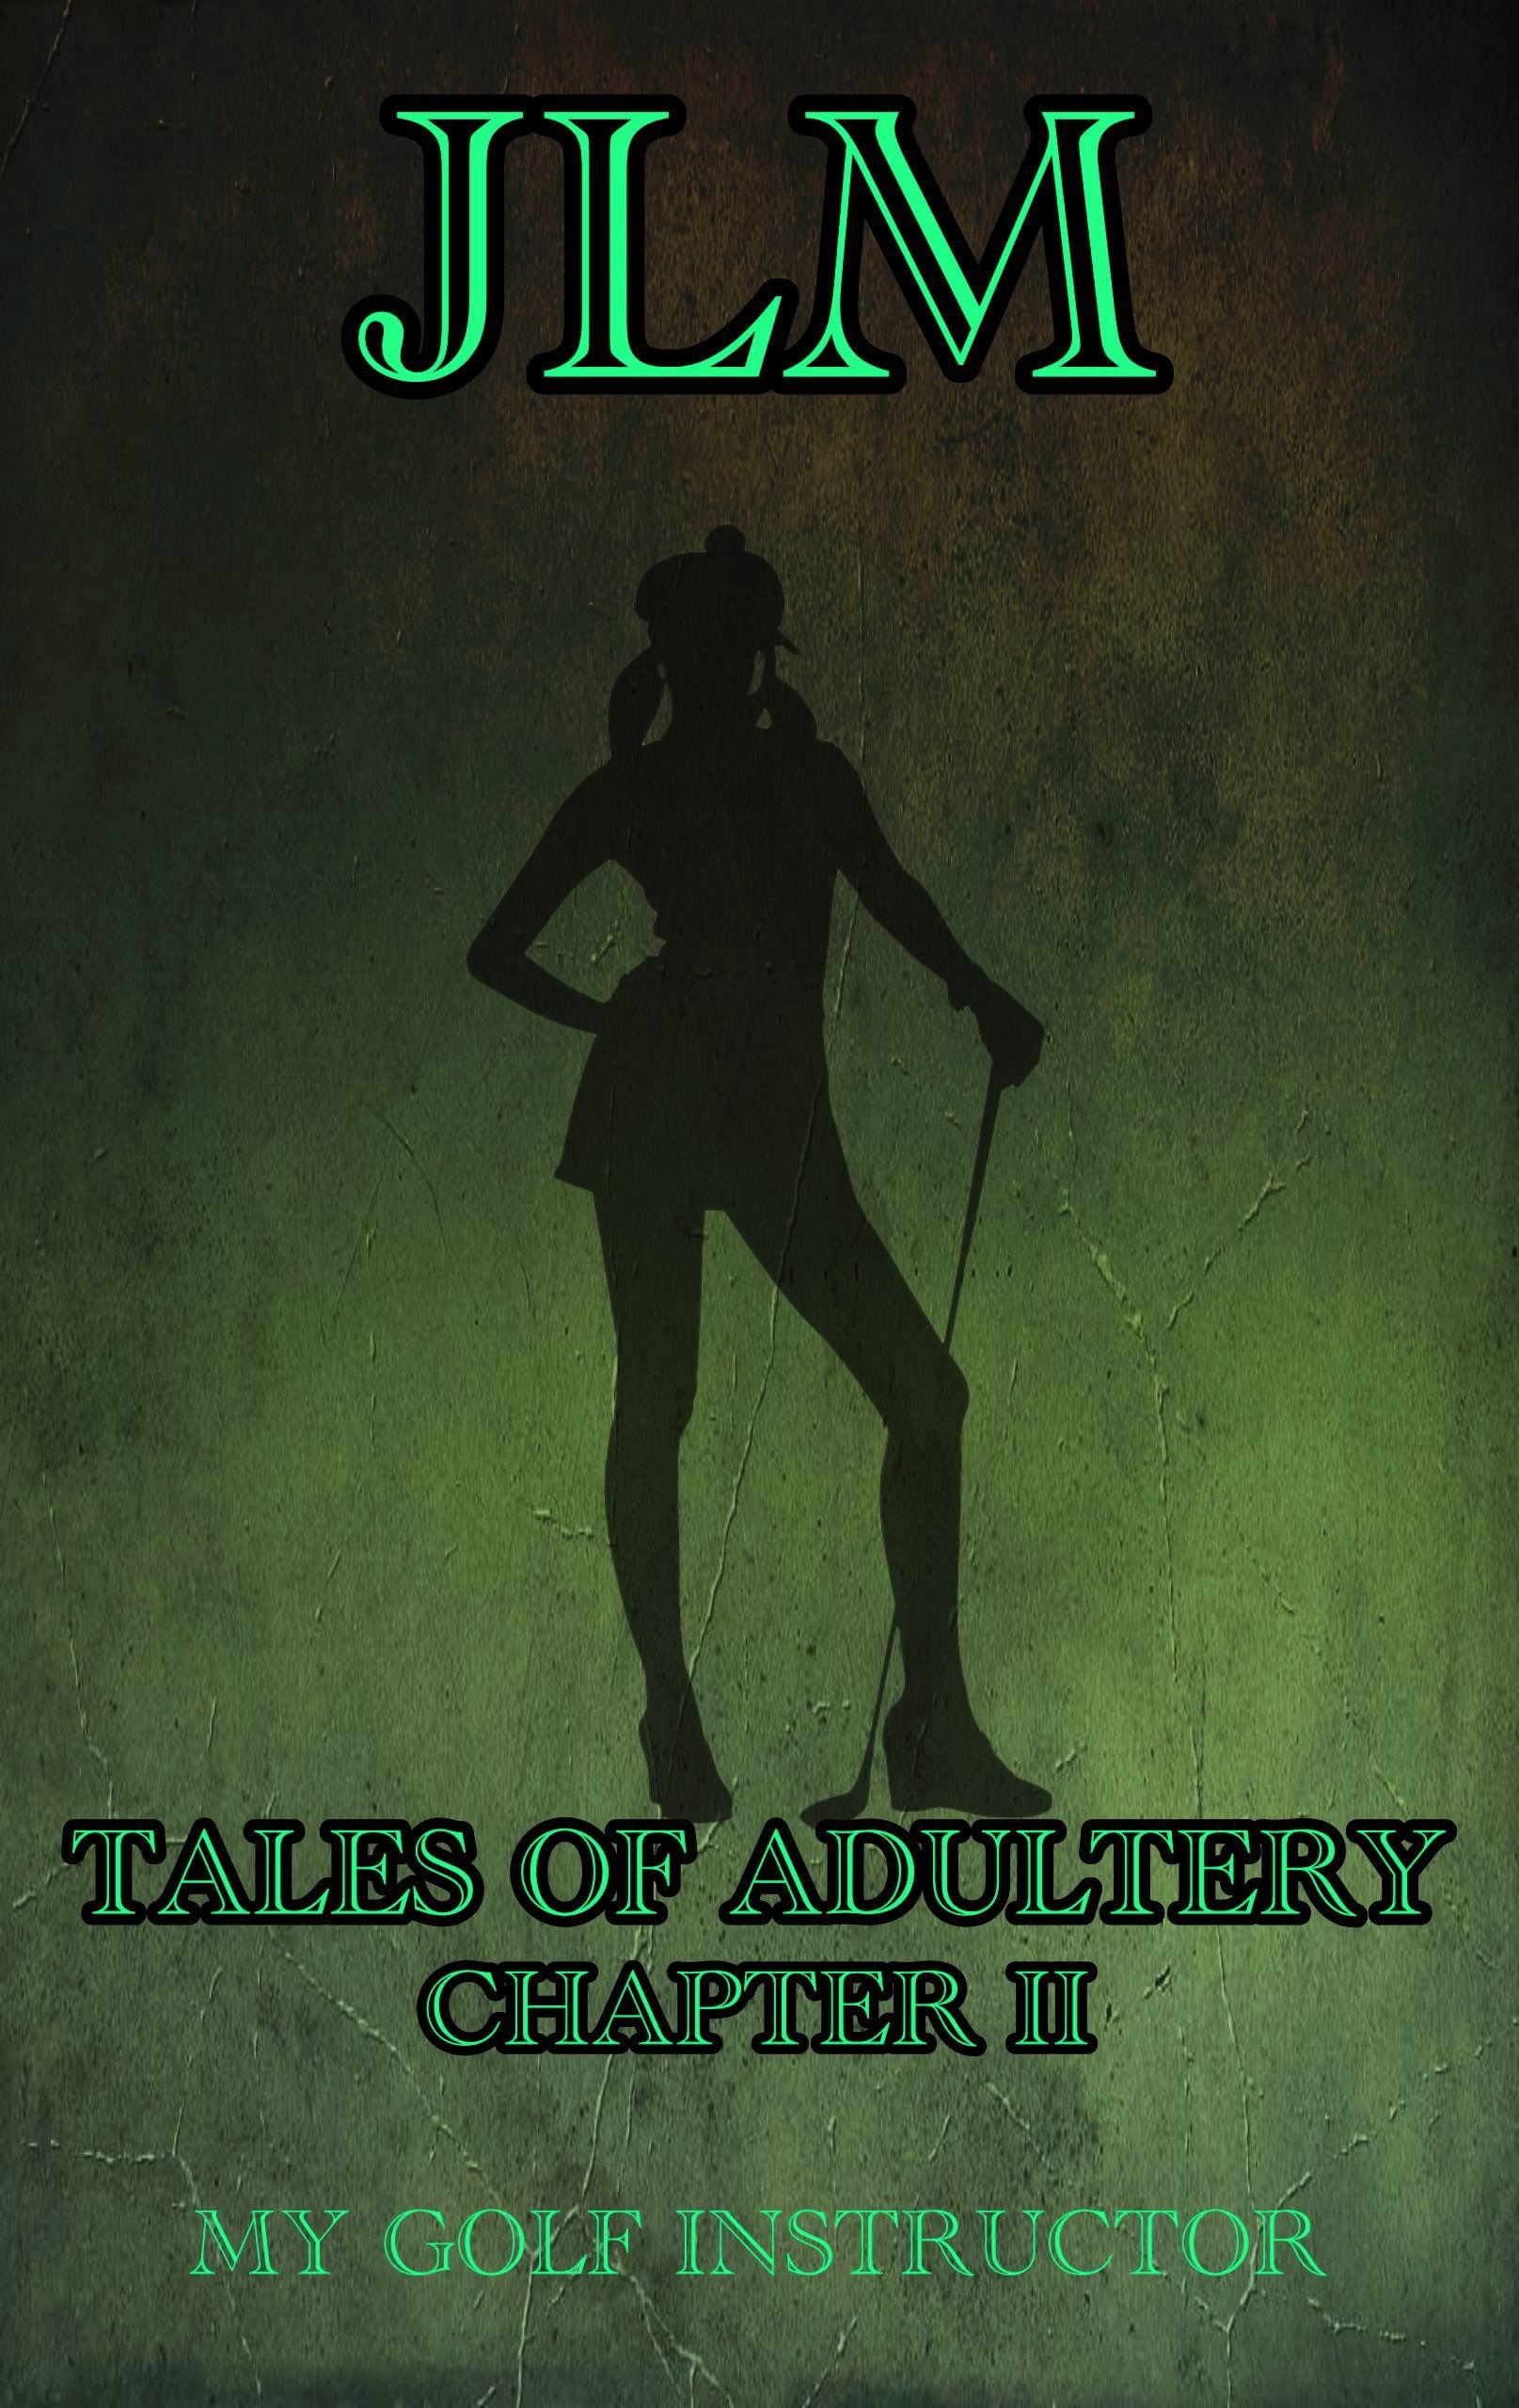 My Golf Instructor: Tales Of Adultery - Chapter 2's Book Image